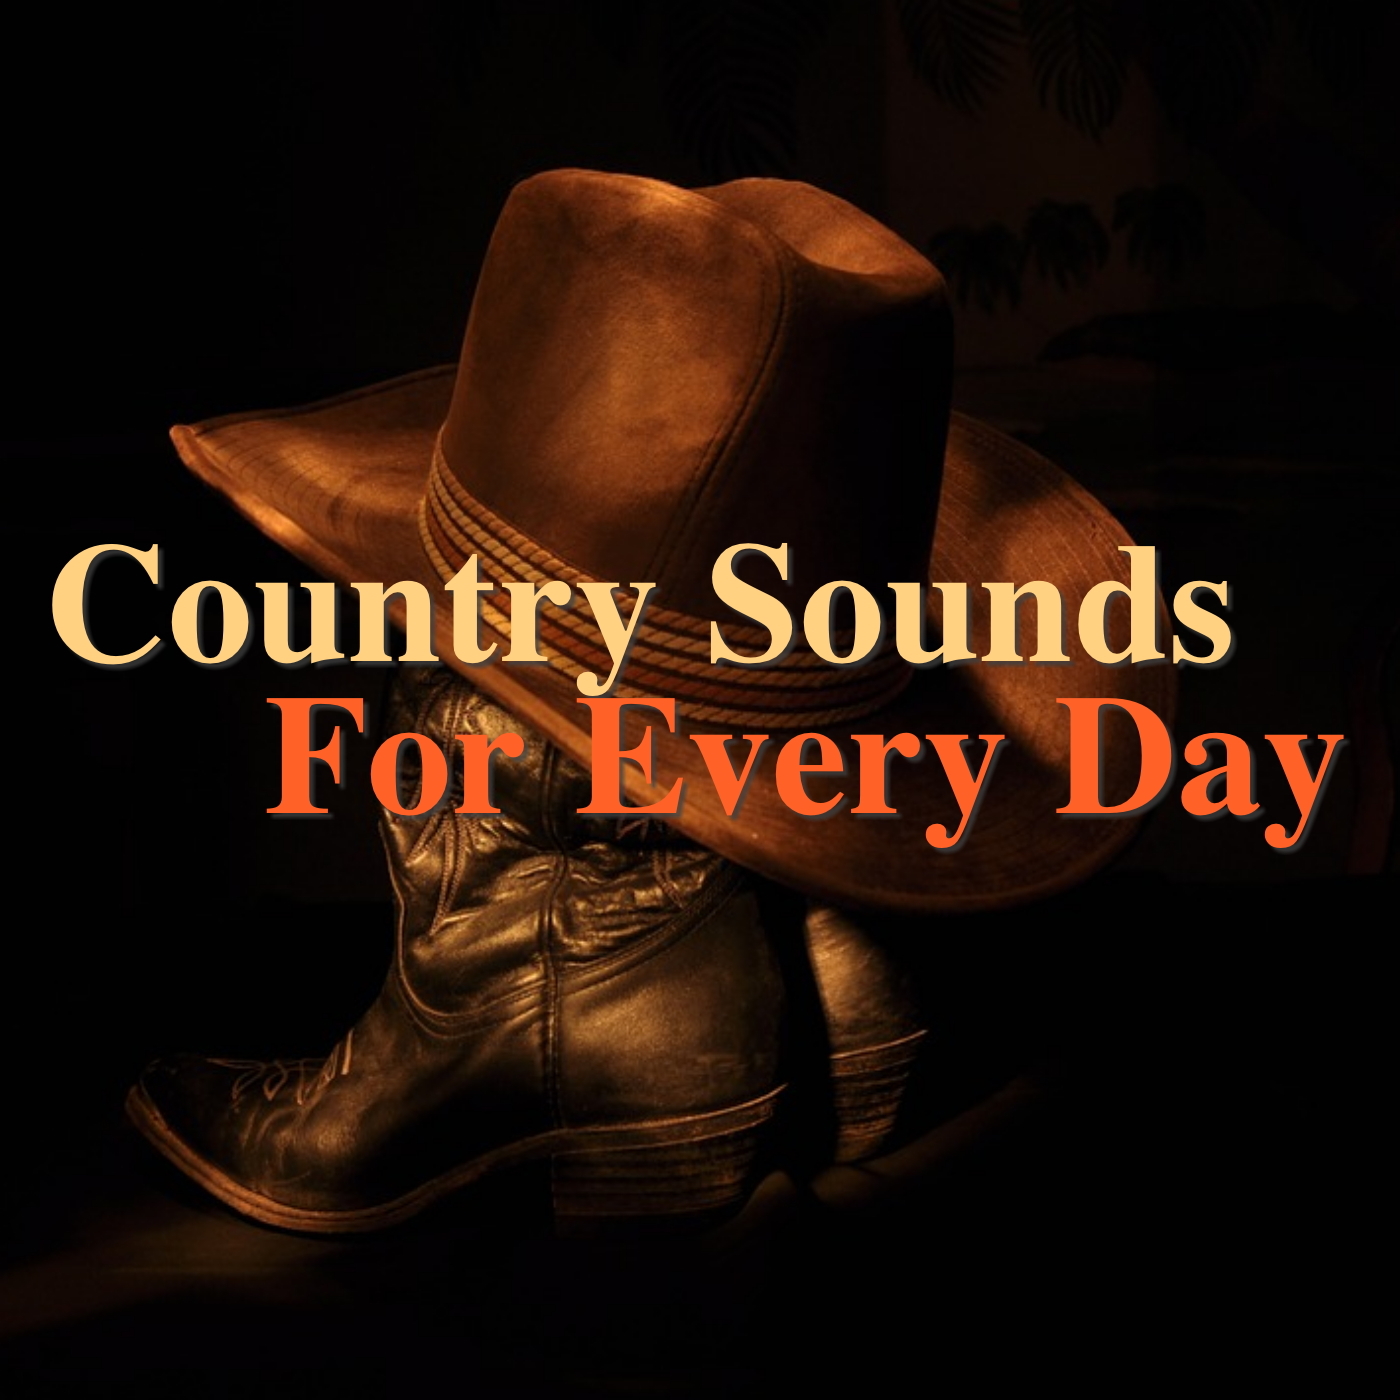 Country Sounds For Every Day